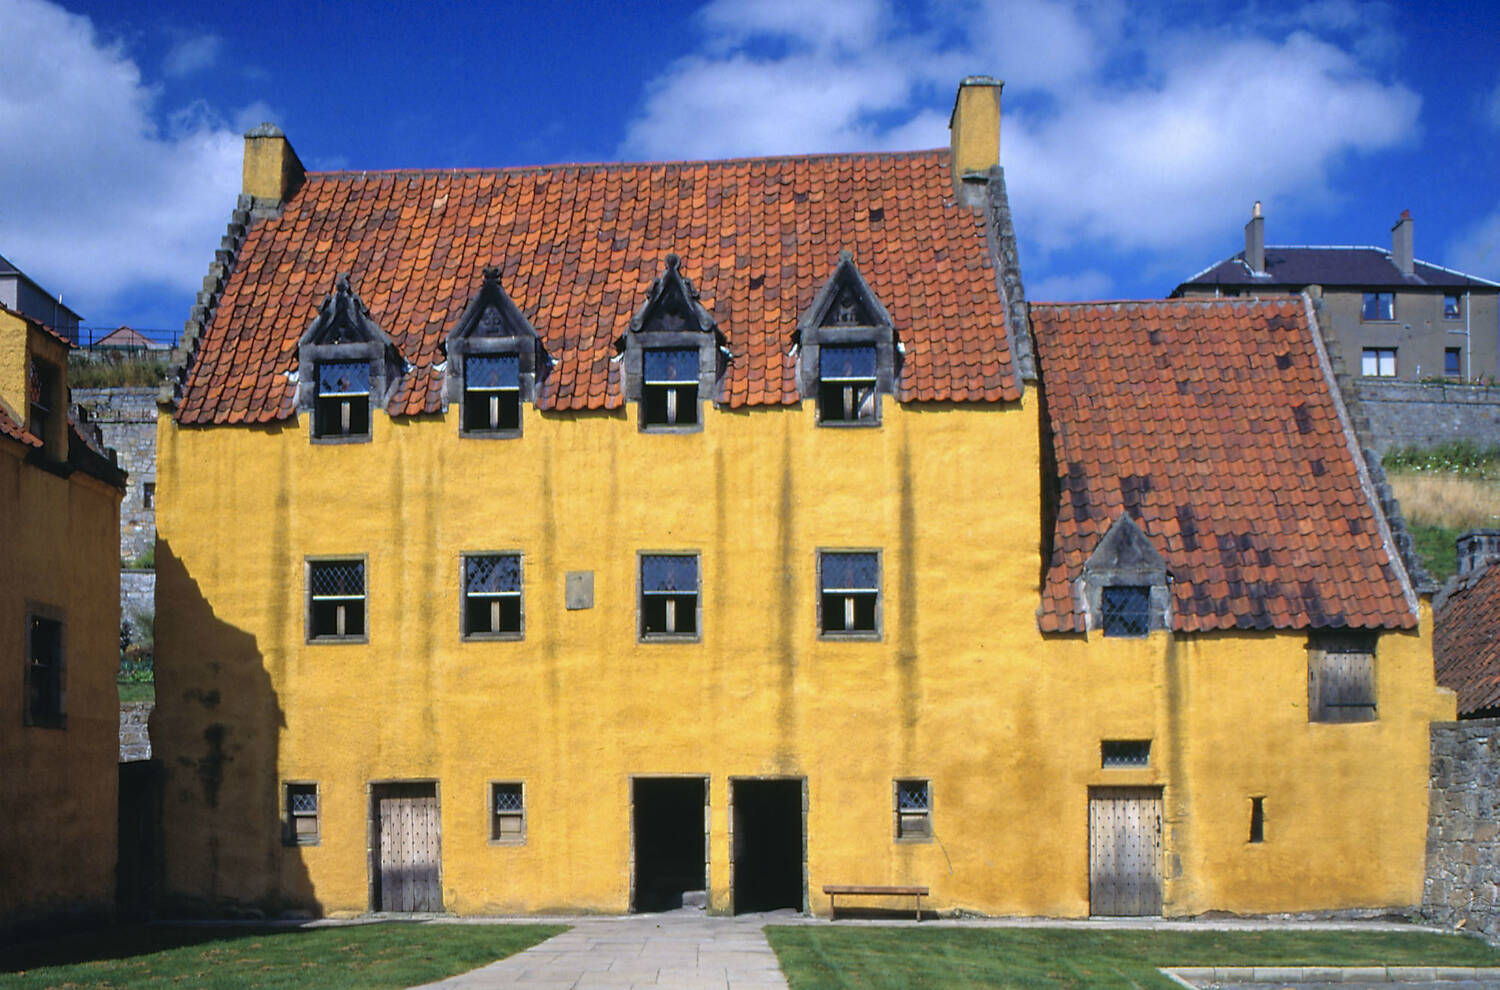 The front of ochre-coloured Culross Palace on a bright sunny day, blue sky visible above the tiled roof.